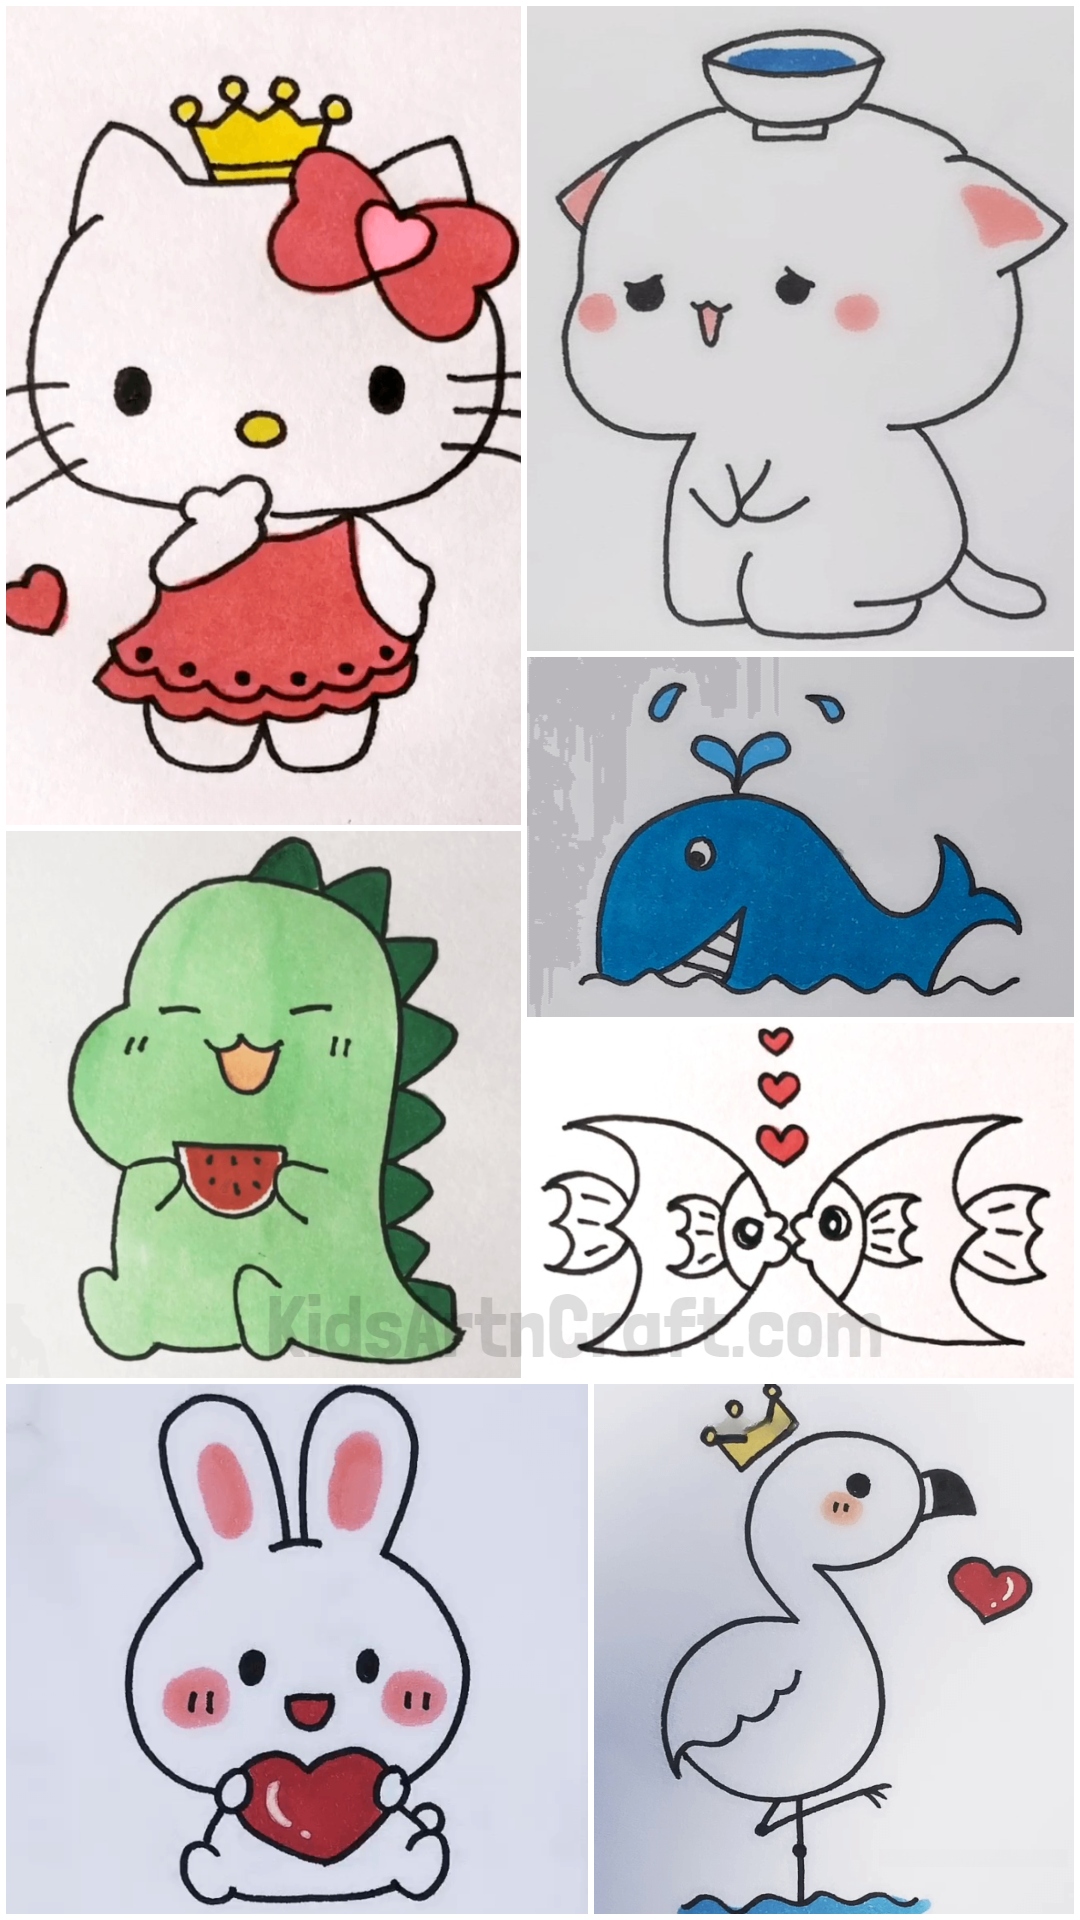 Easy & Fun Spring Drawing Ideas for Kids